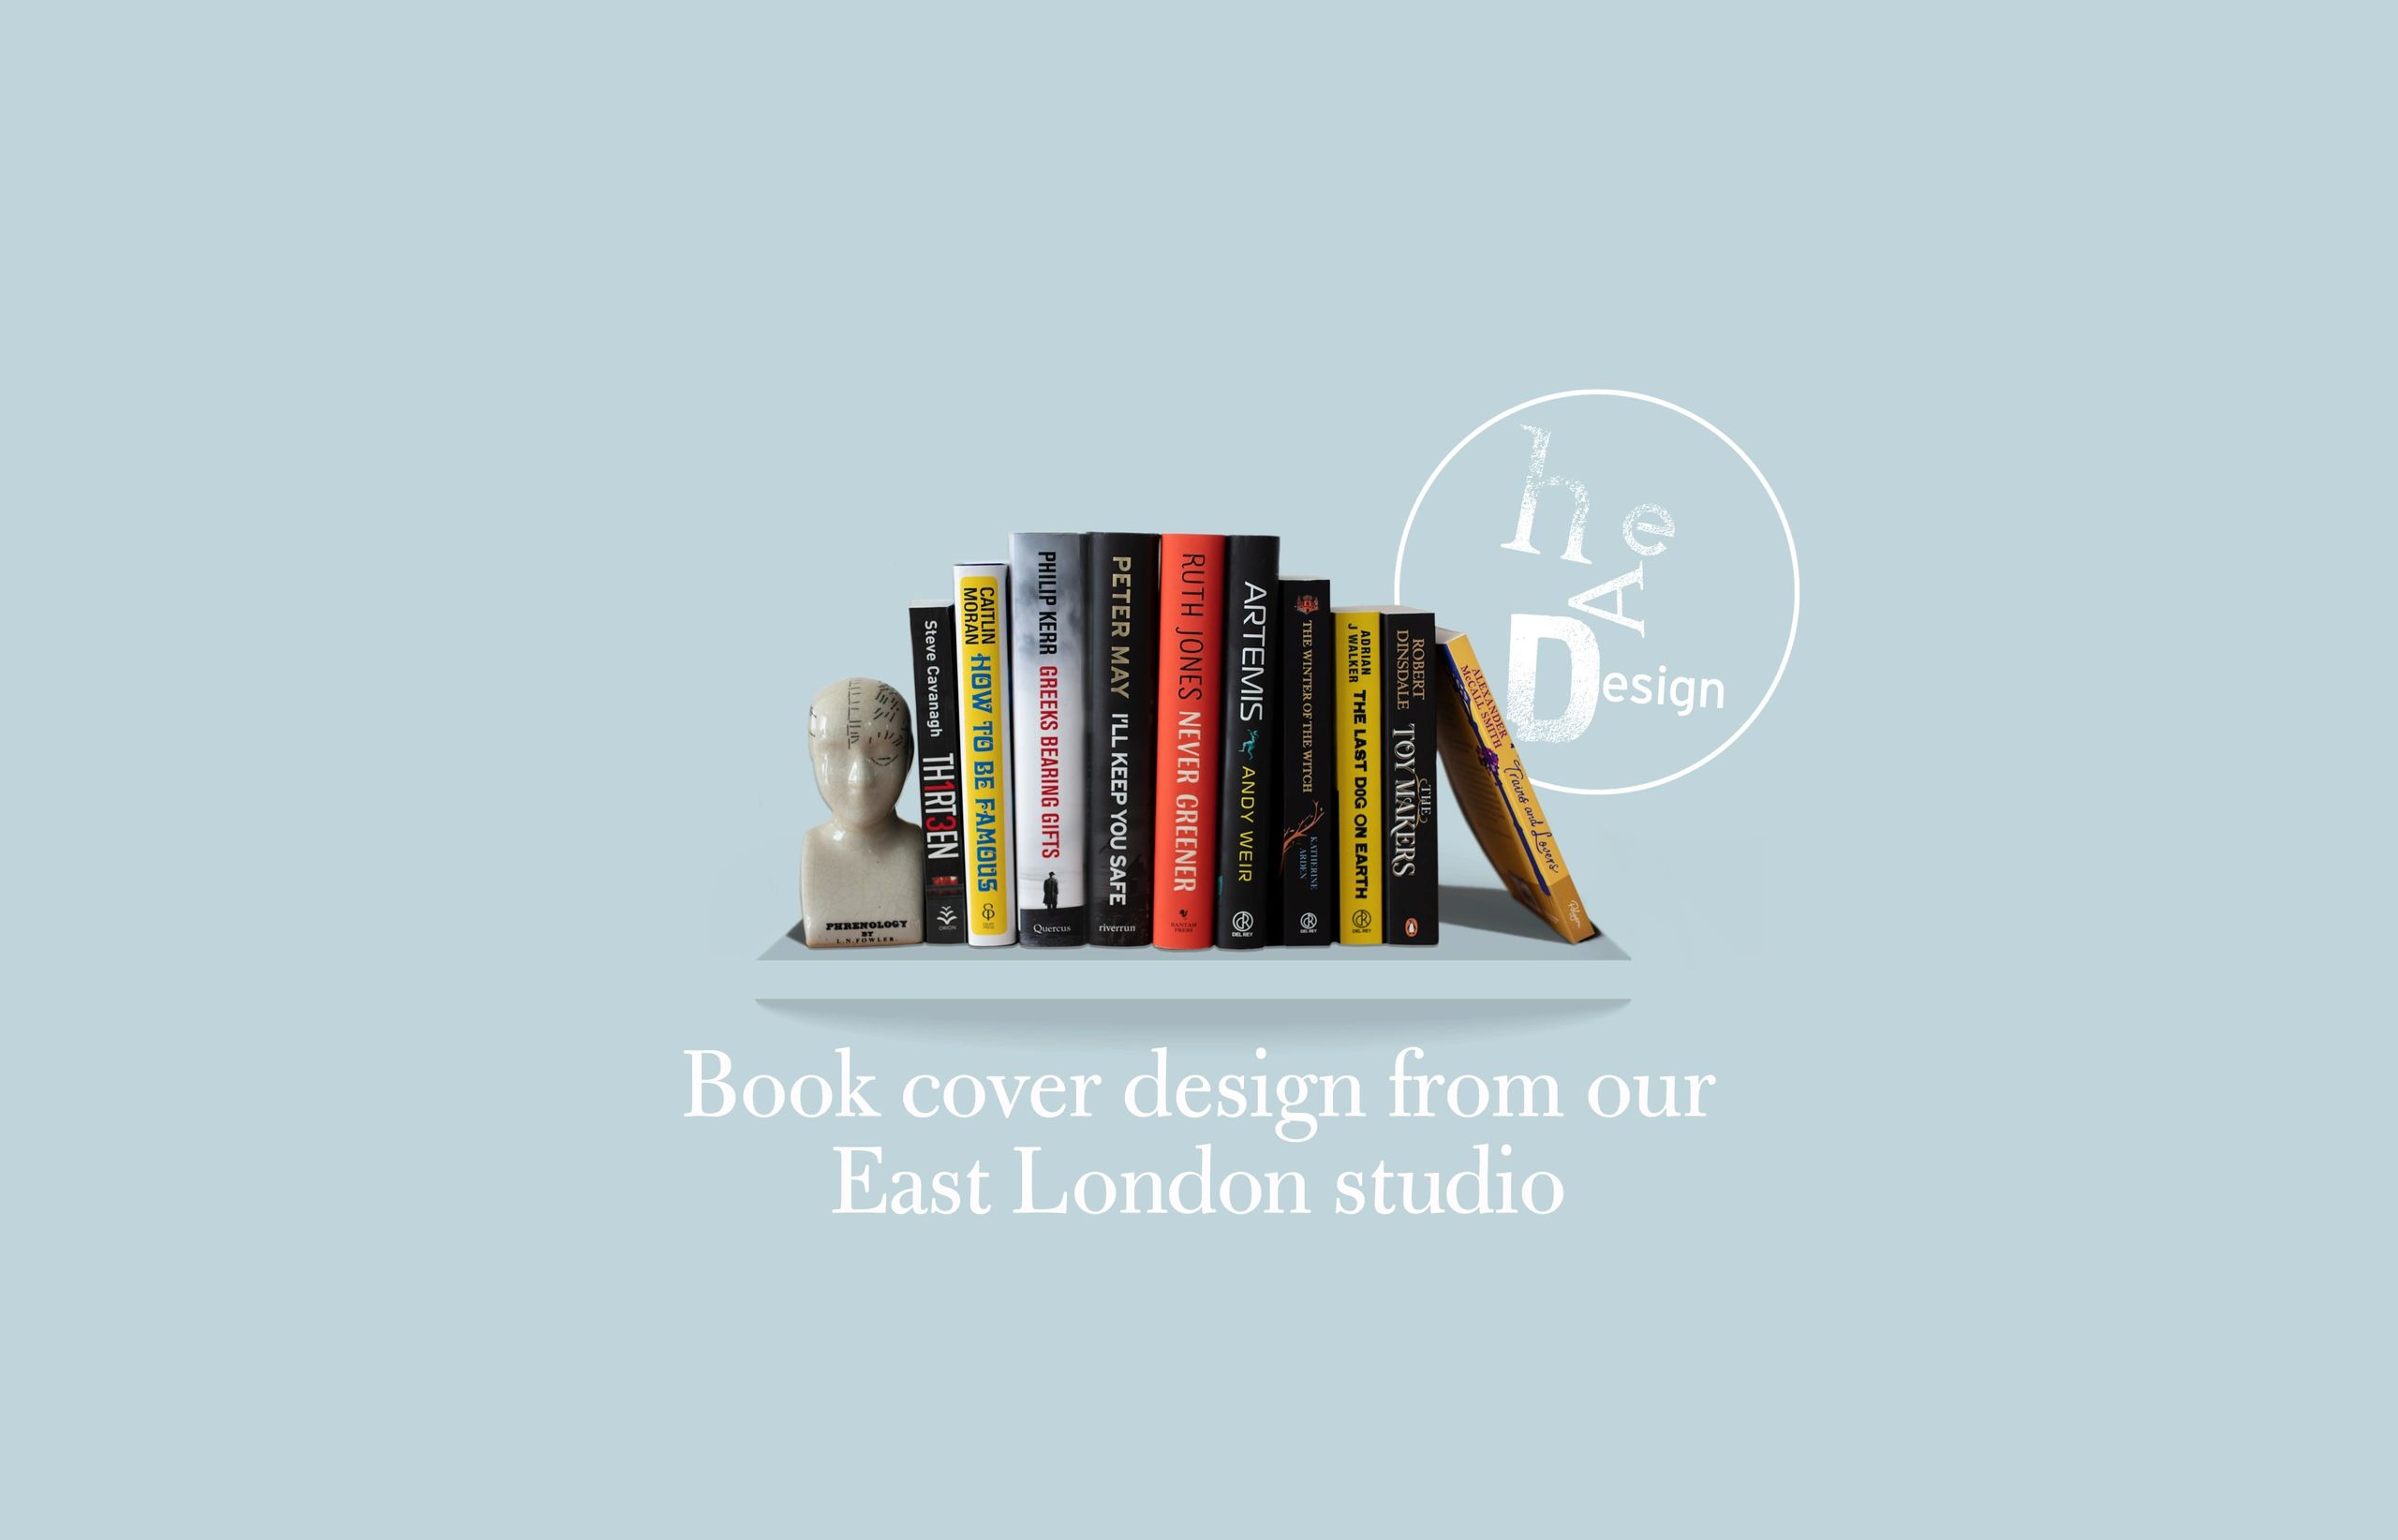 Book cover design from our studio in East London. Our shelfie contains some of our latest work.